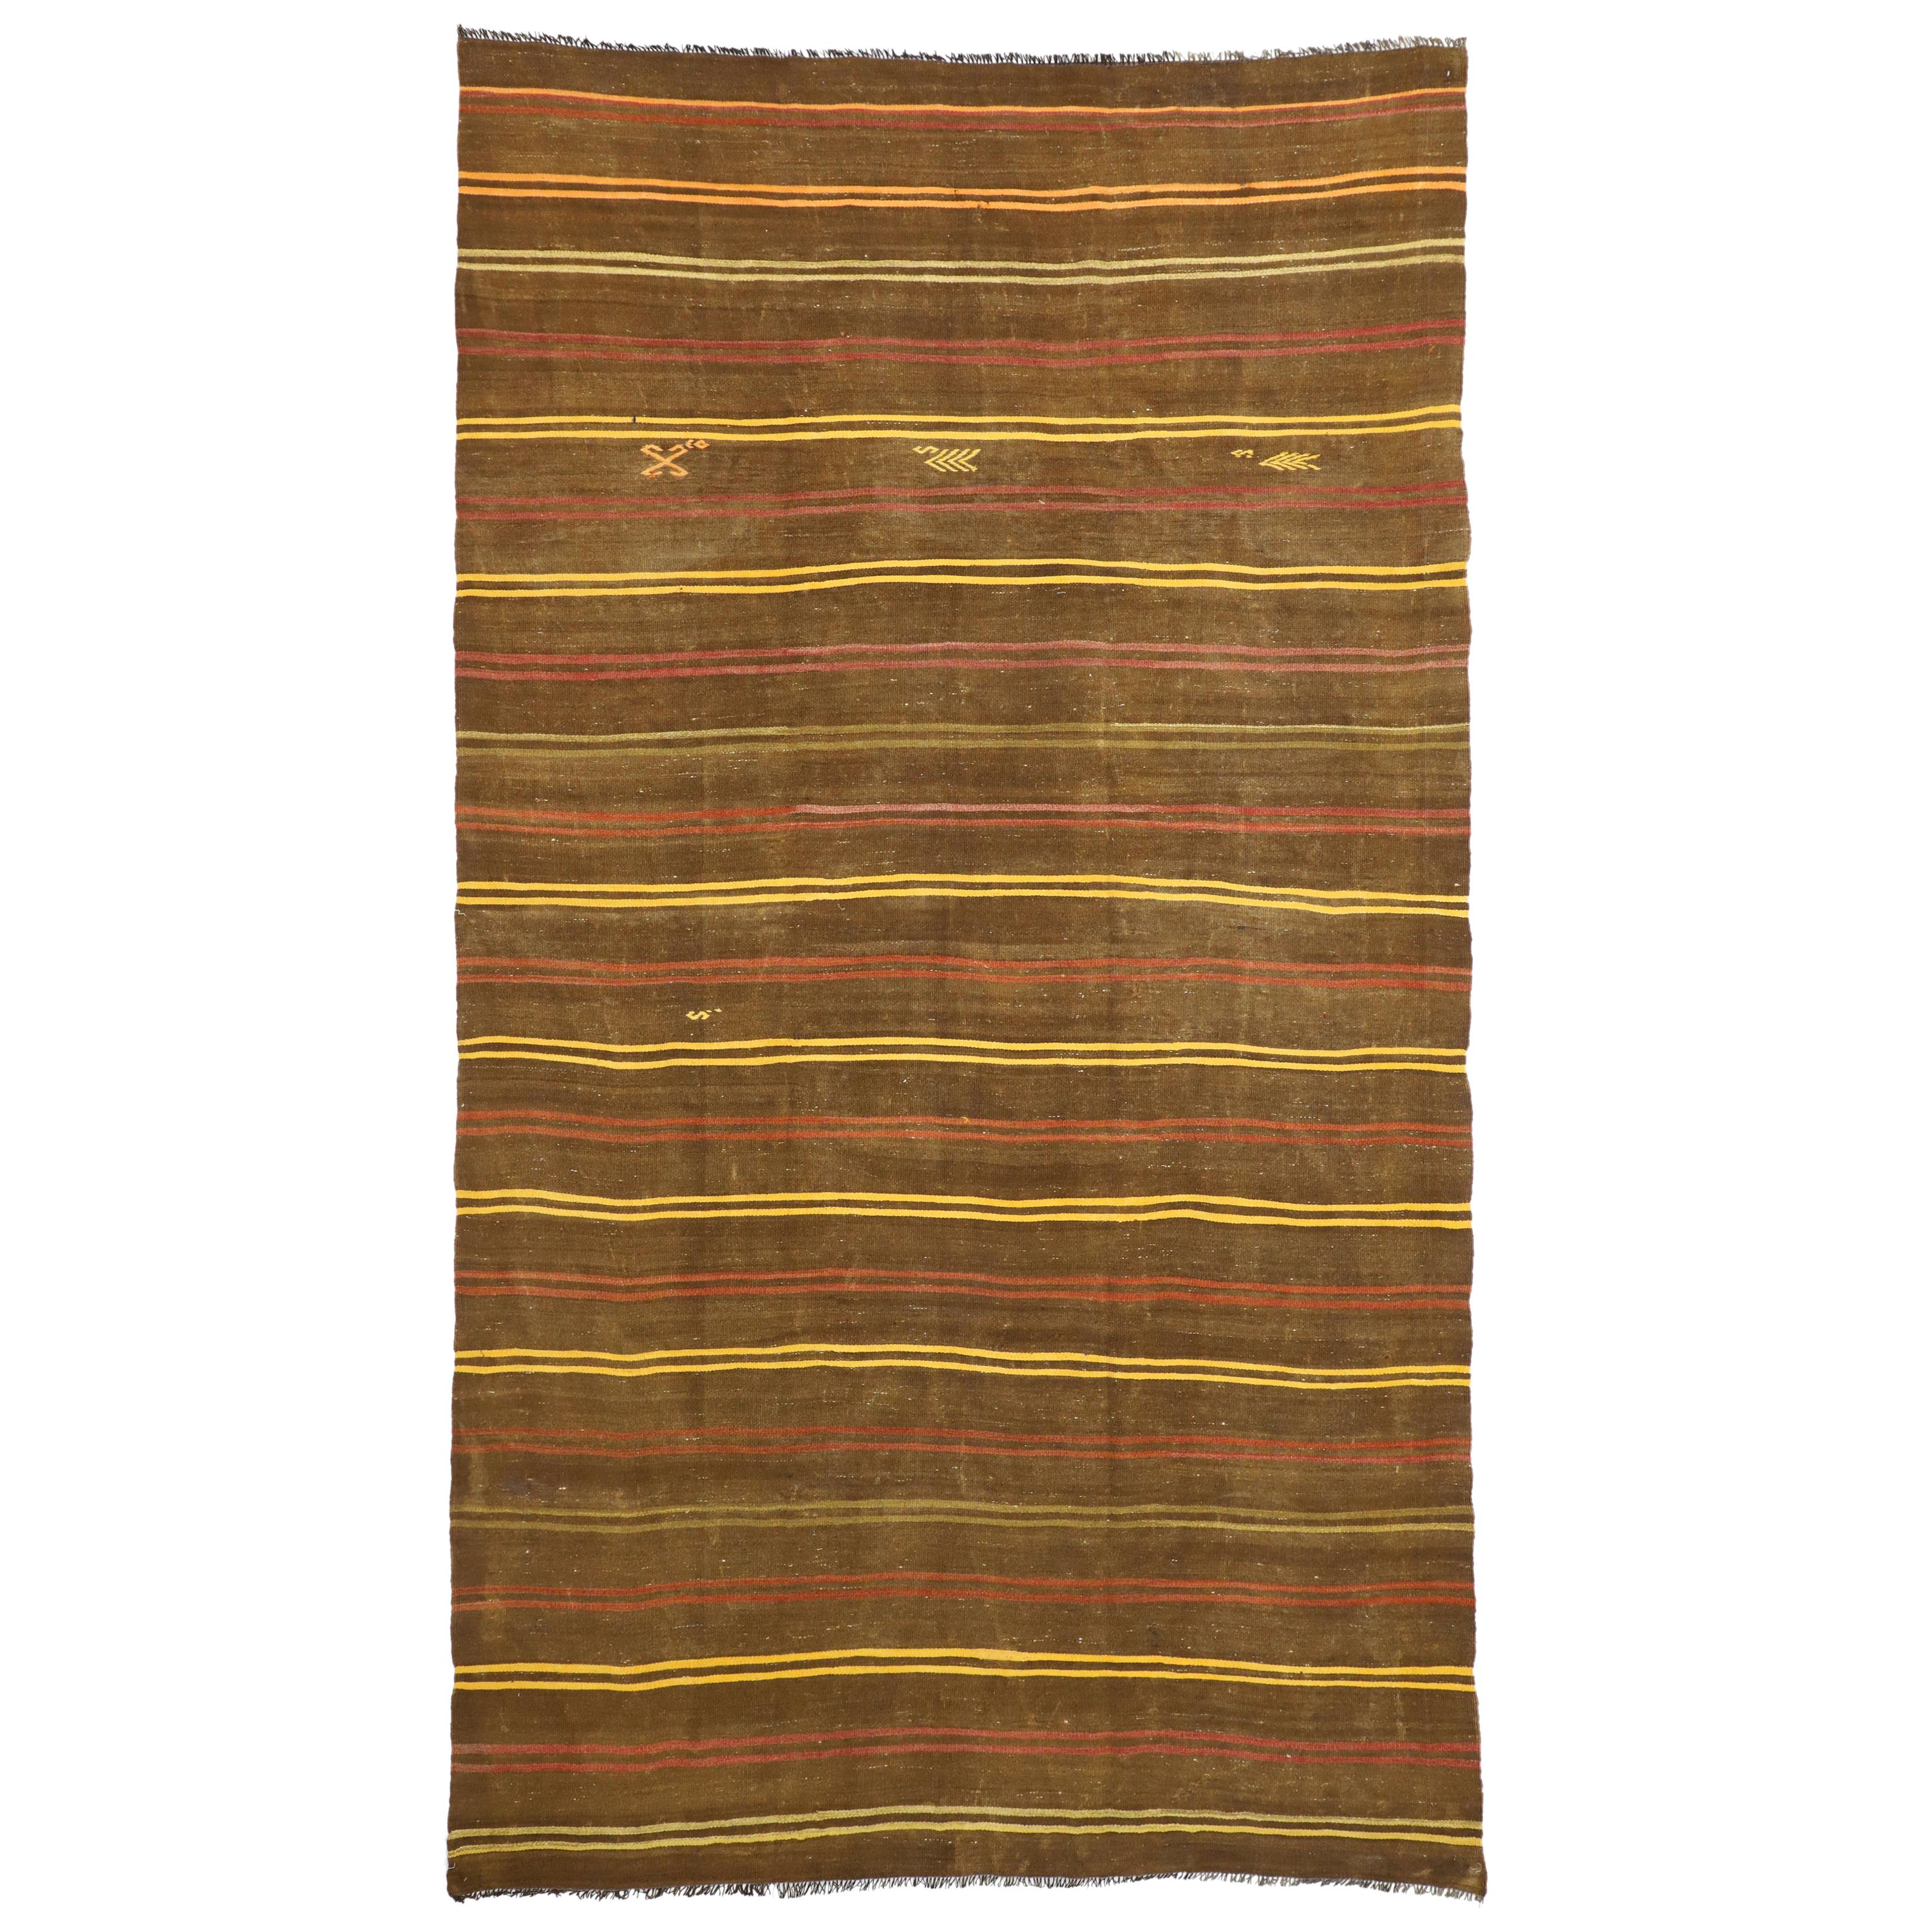 Vintage Turkish Striped Kilim Rug with Bohemian Tribal Style, Flat-Weave Rug For Sale